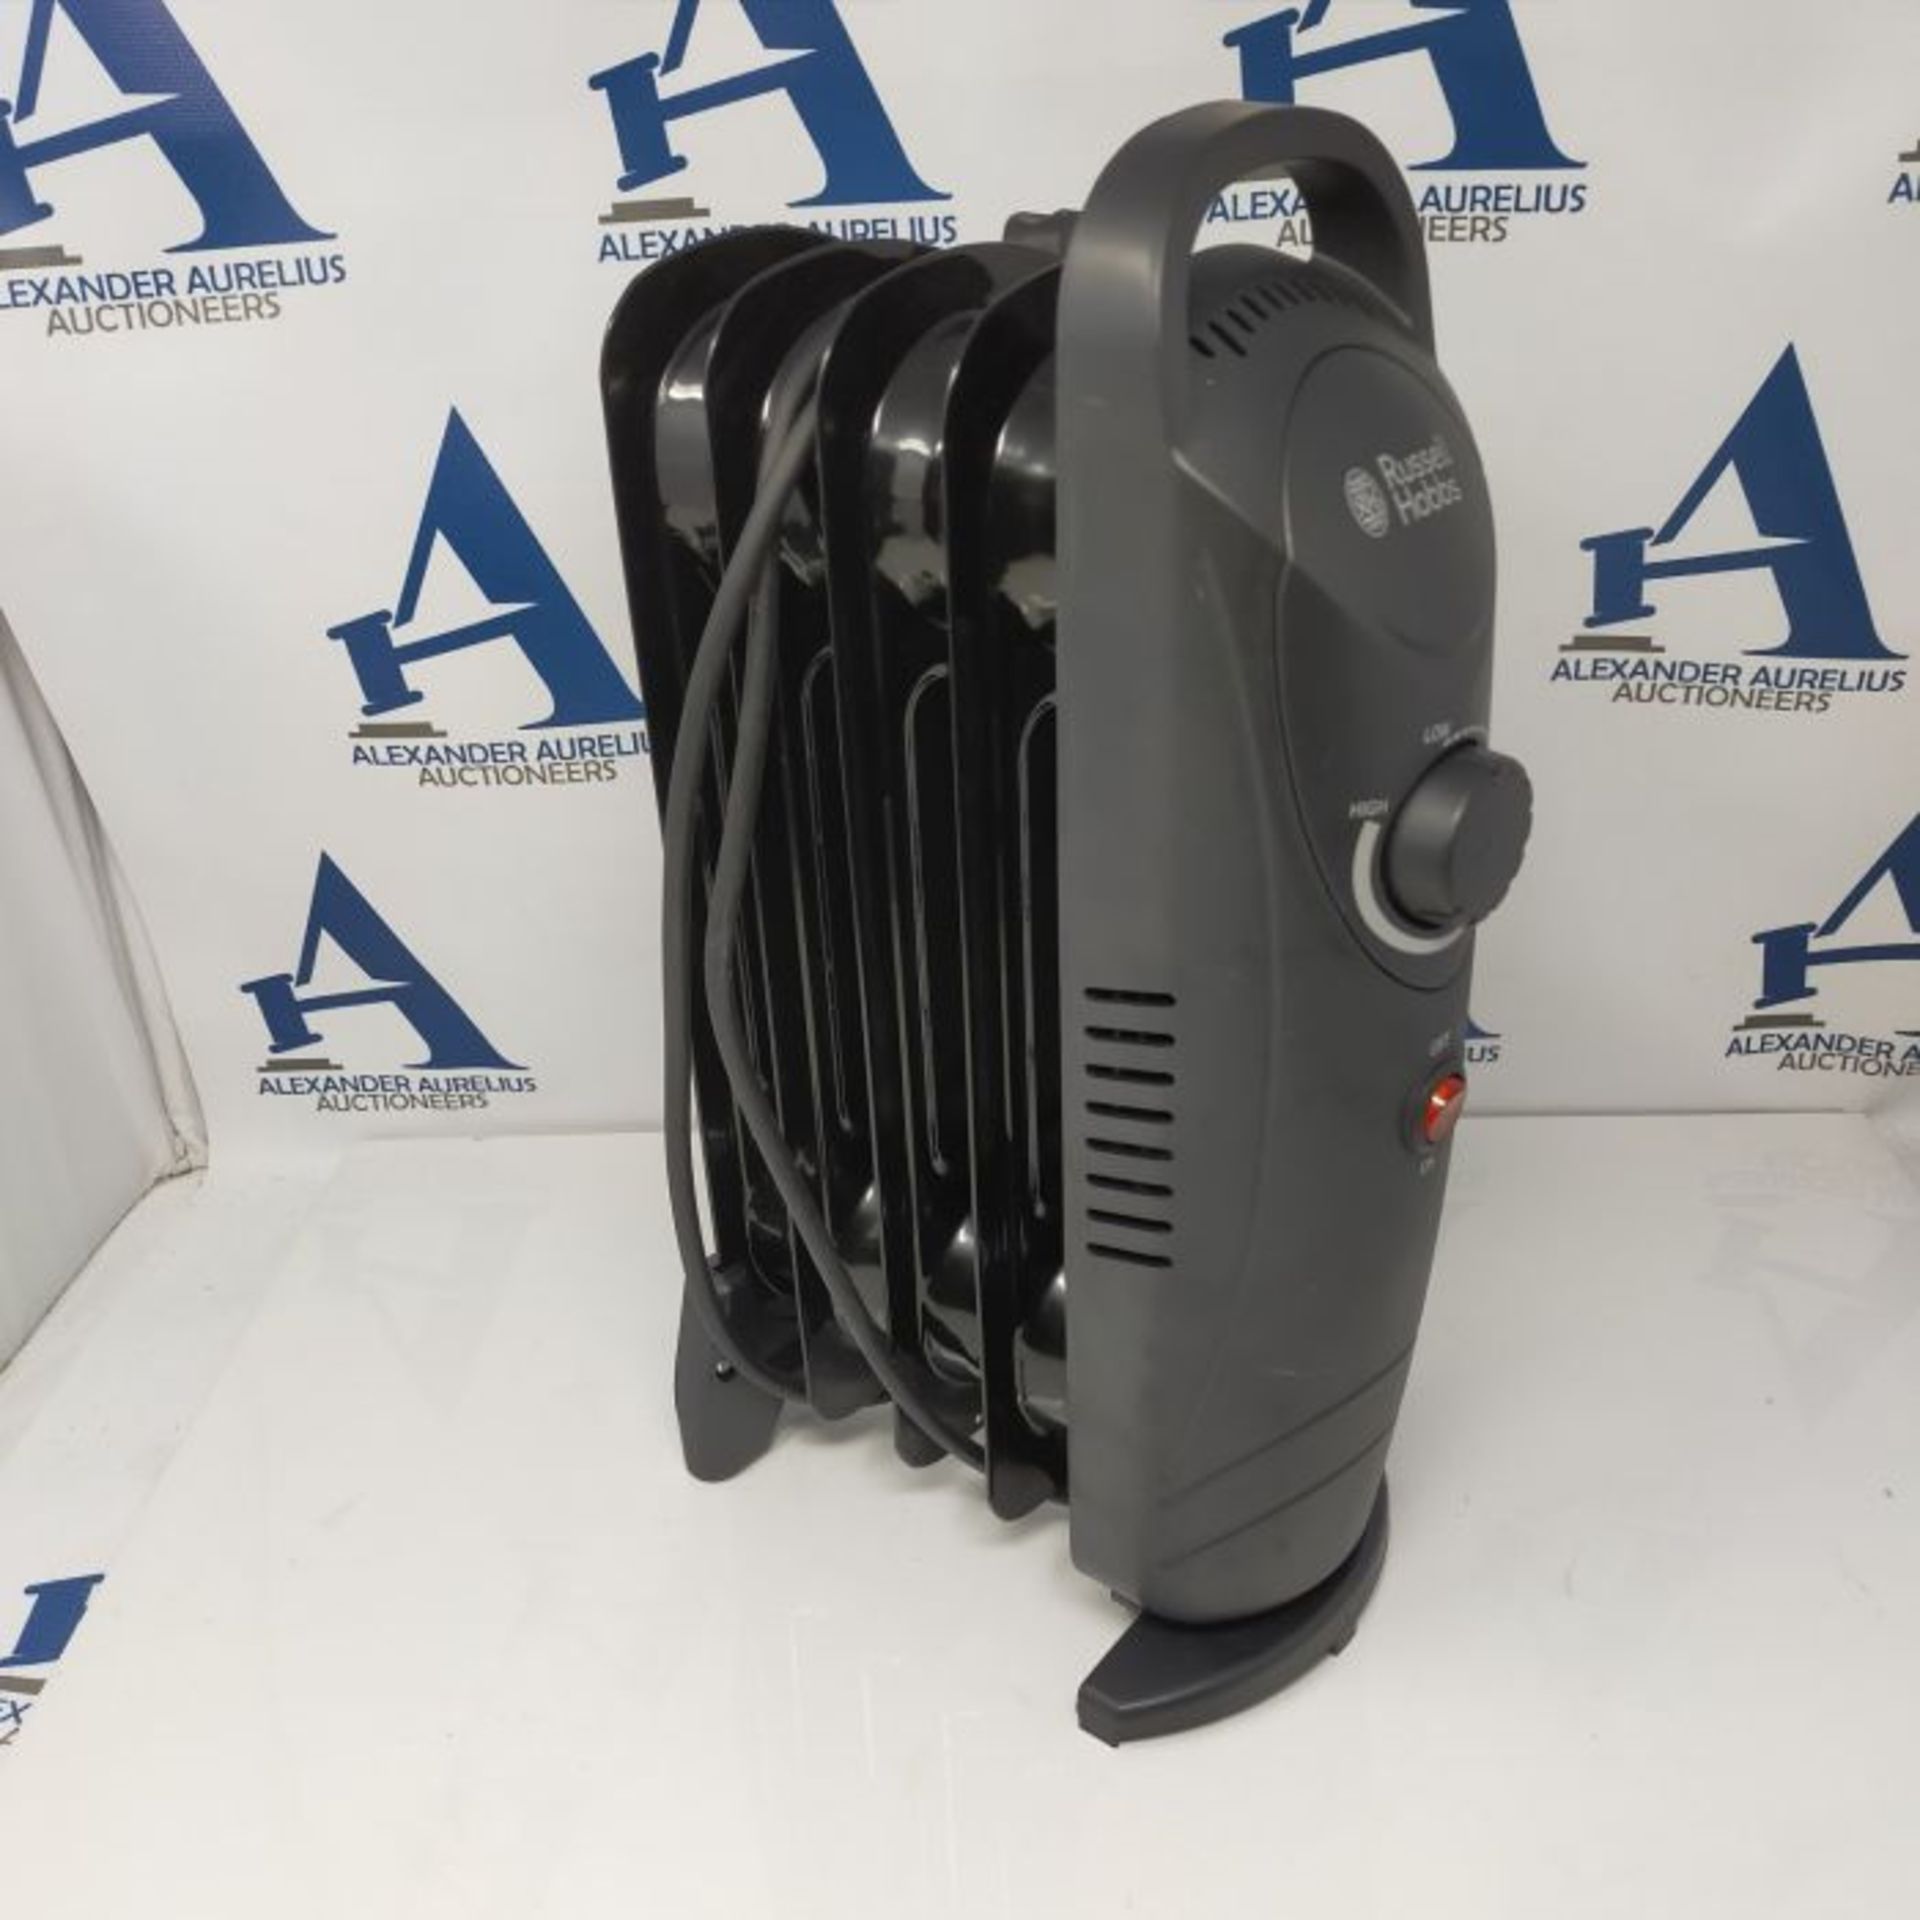 Russell Hobbs 650W Oil Filled Radiator, 5 Fin Portable Electric Heater - Black, Adjust - Image 2 of 3